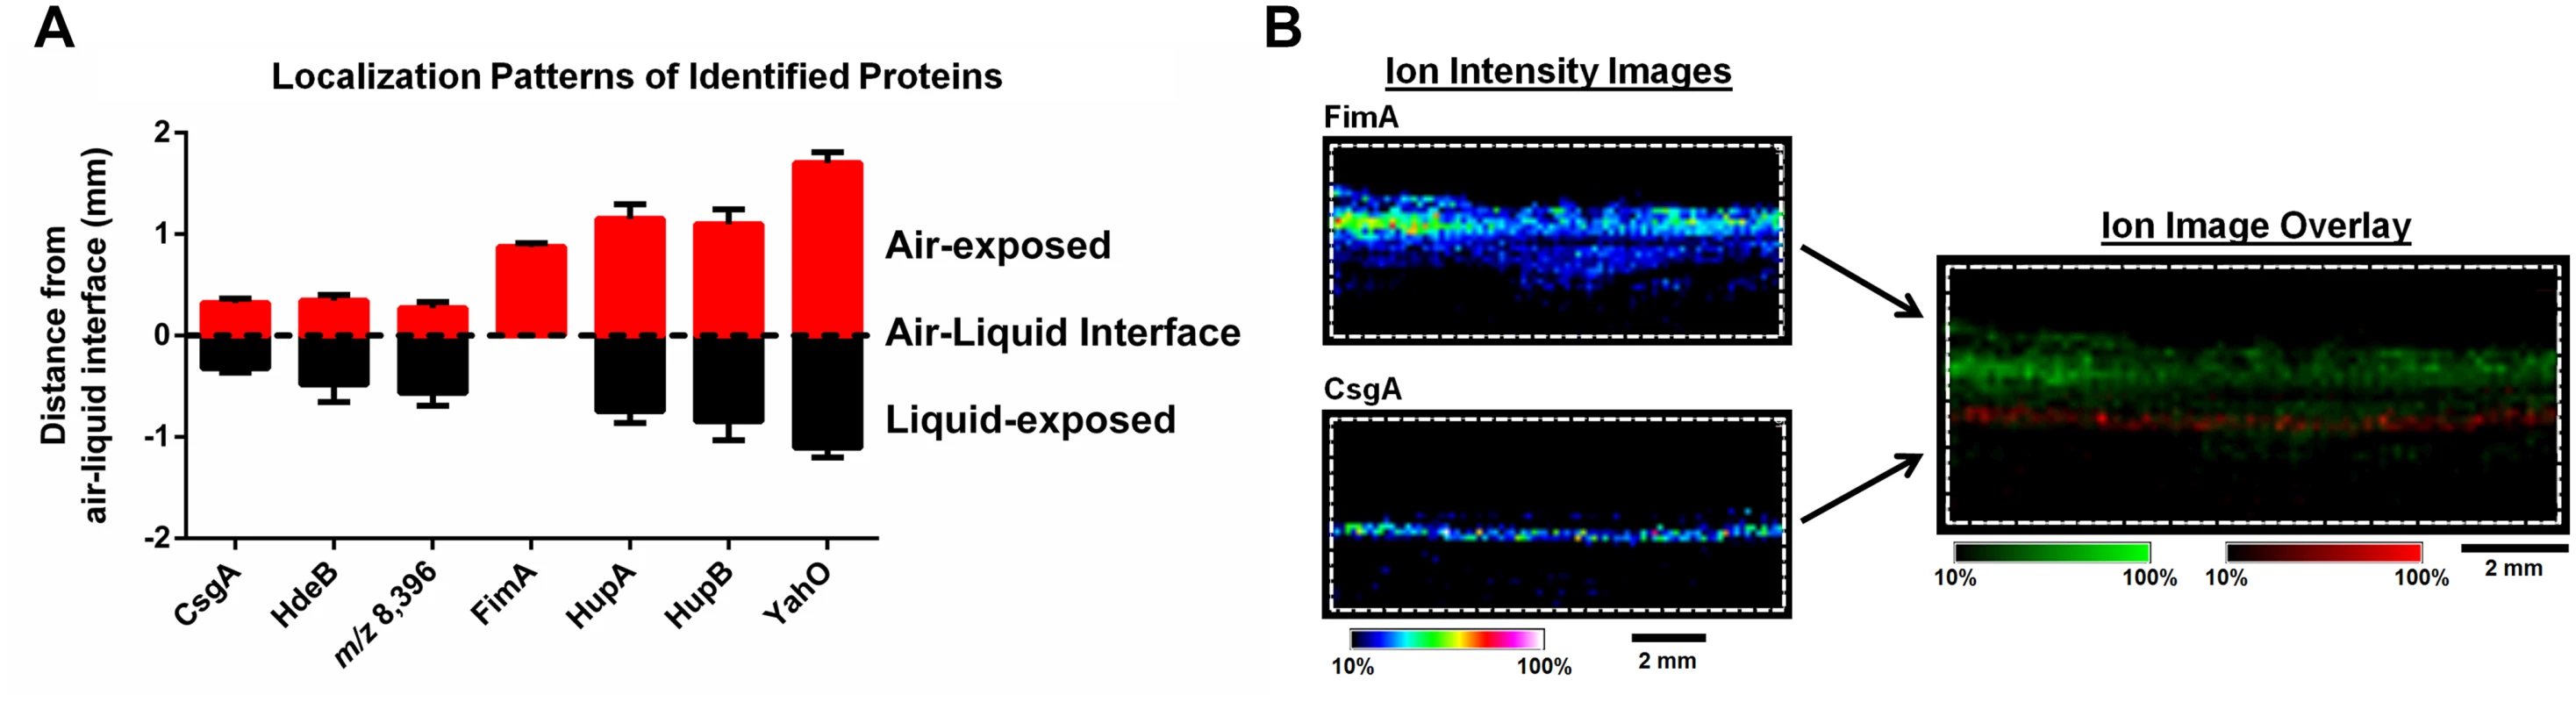 IMS analysis reveals stratification of identified UPEC proteins and distinct localization of FimA and CsgA within the biofilm.